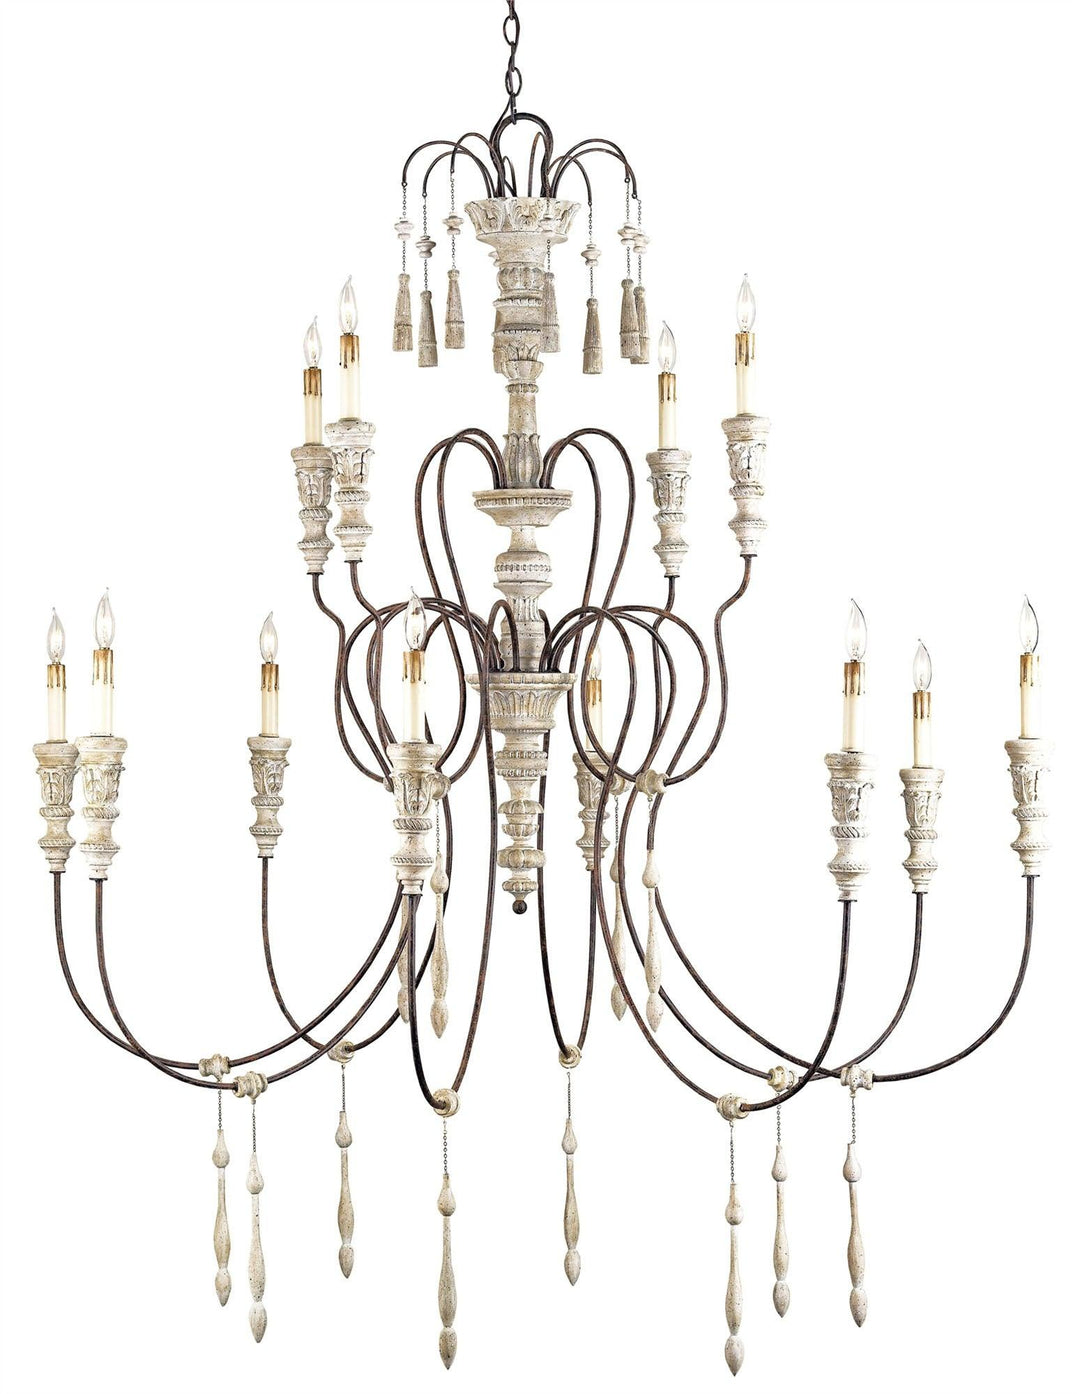 Hannah Large Chandelier - Casey & Company